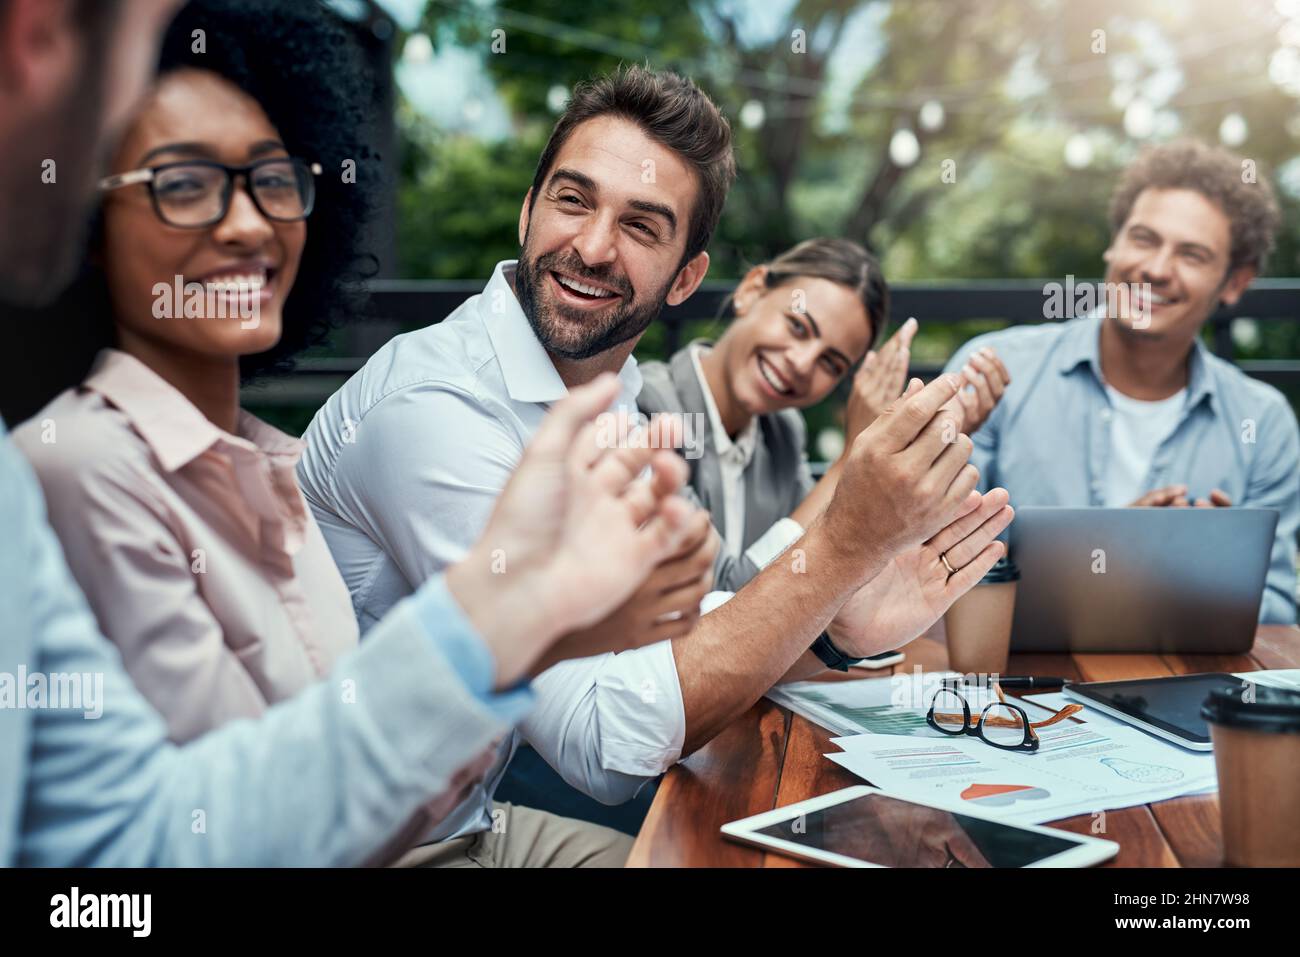 Seeing their success all come together. Shot of a group of colleagues applauding during a meeting at a cafe. Stock Photo